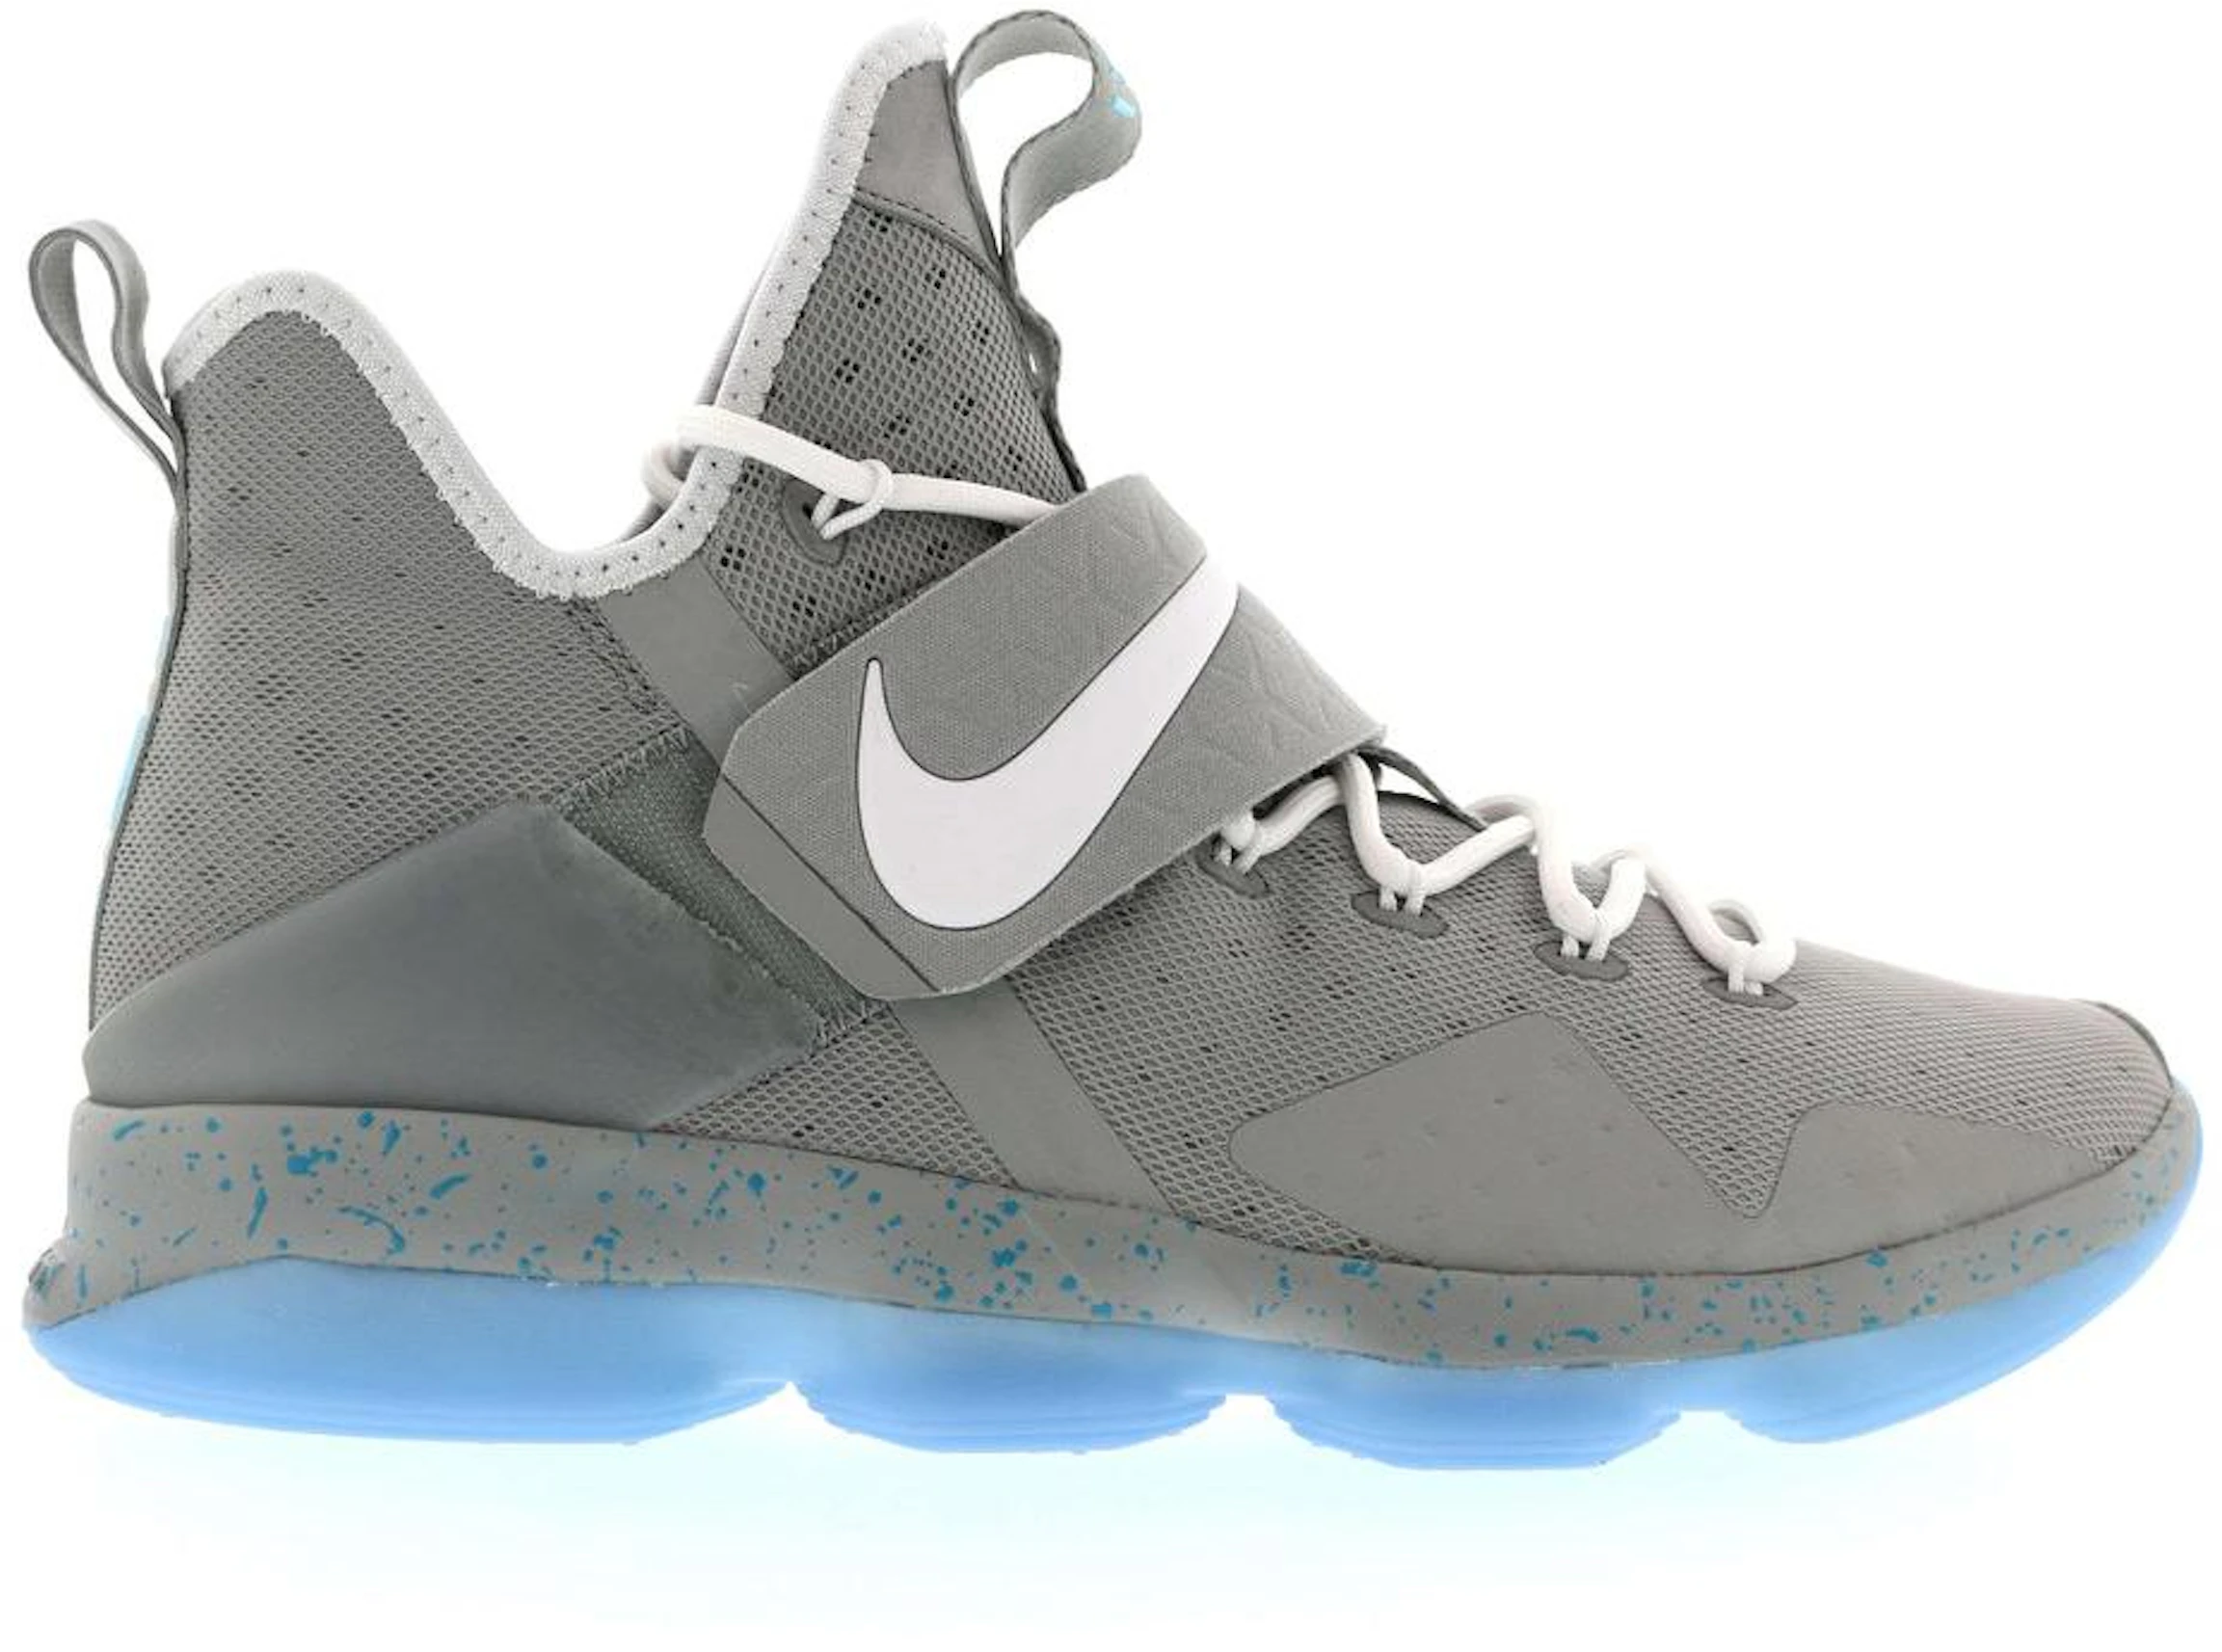 Buy Nike Lebron 14 Shoes & New Sneakers - Stockx